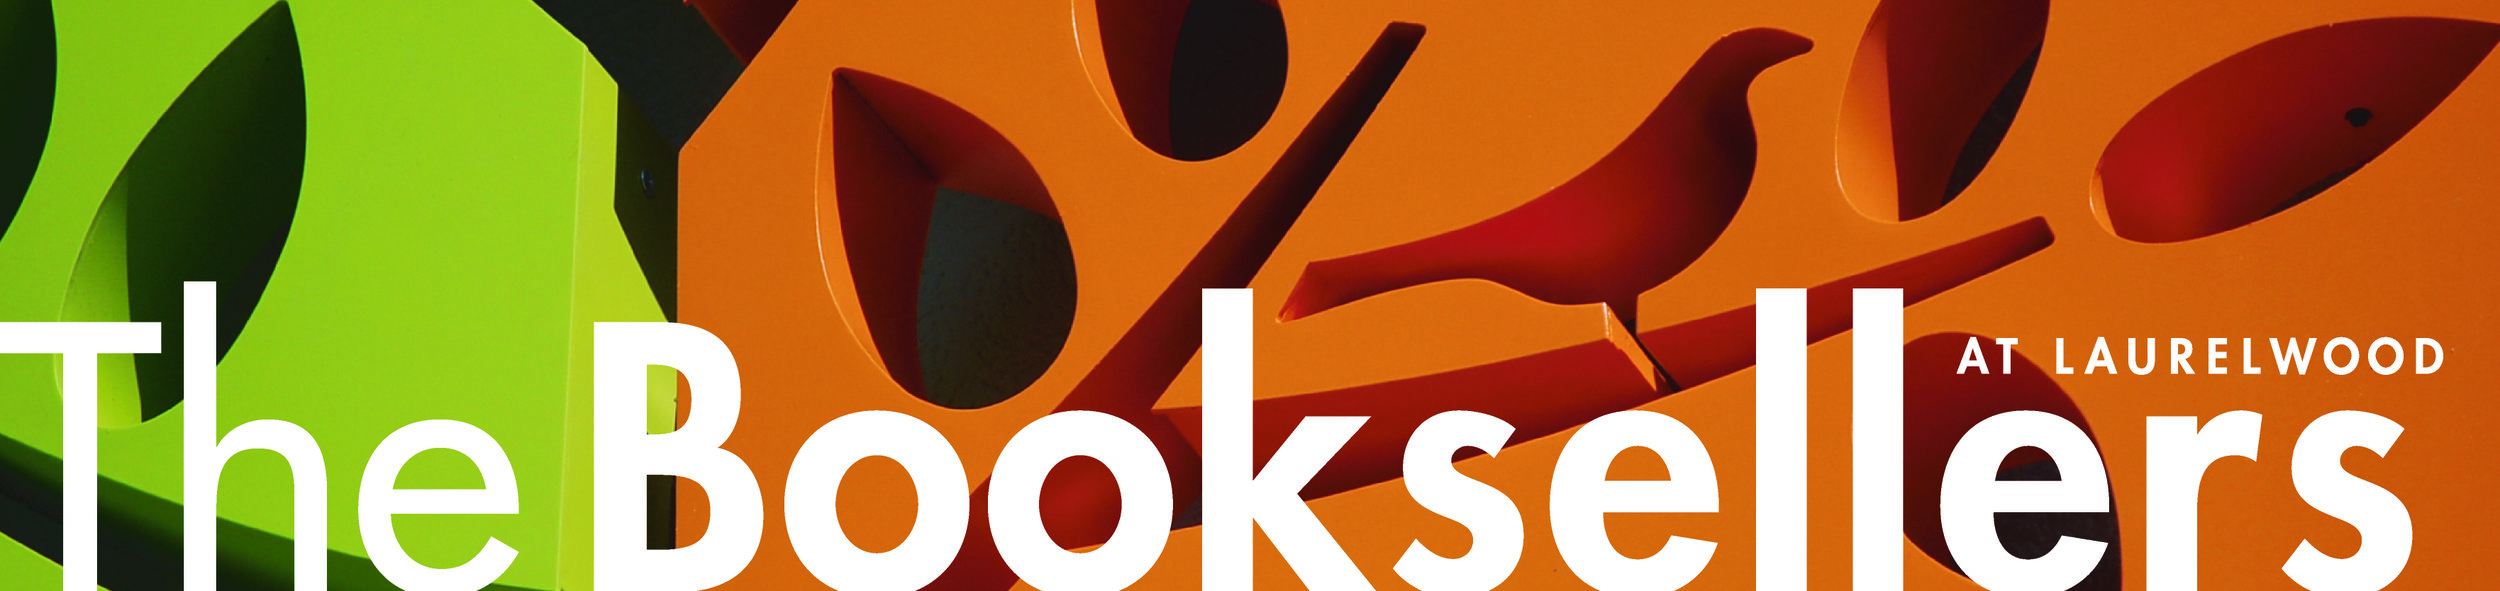  The Booksellers at Laurelwood website header  Creative and design by Chuck Mitchell  Laurelwood Center Memphis, Tennessee 